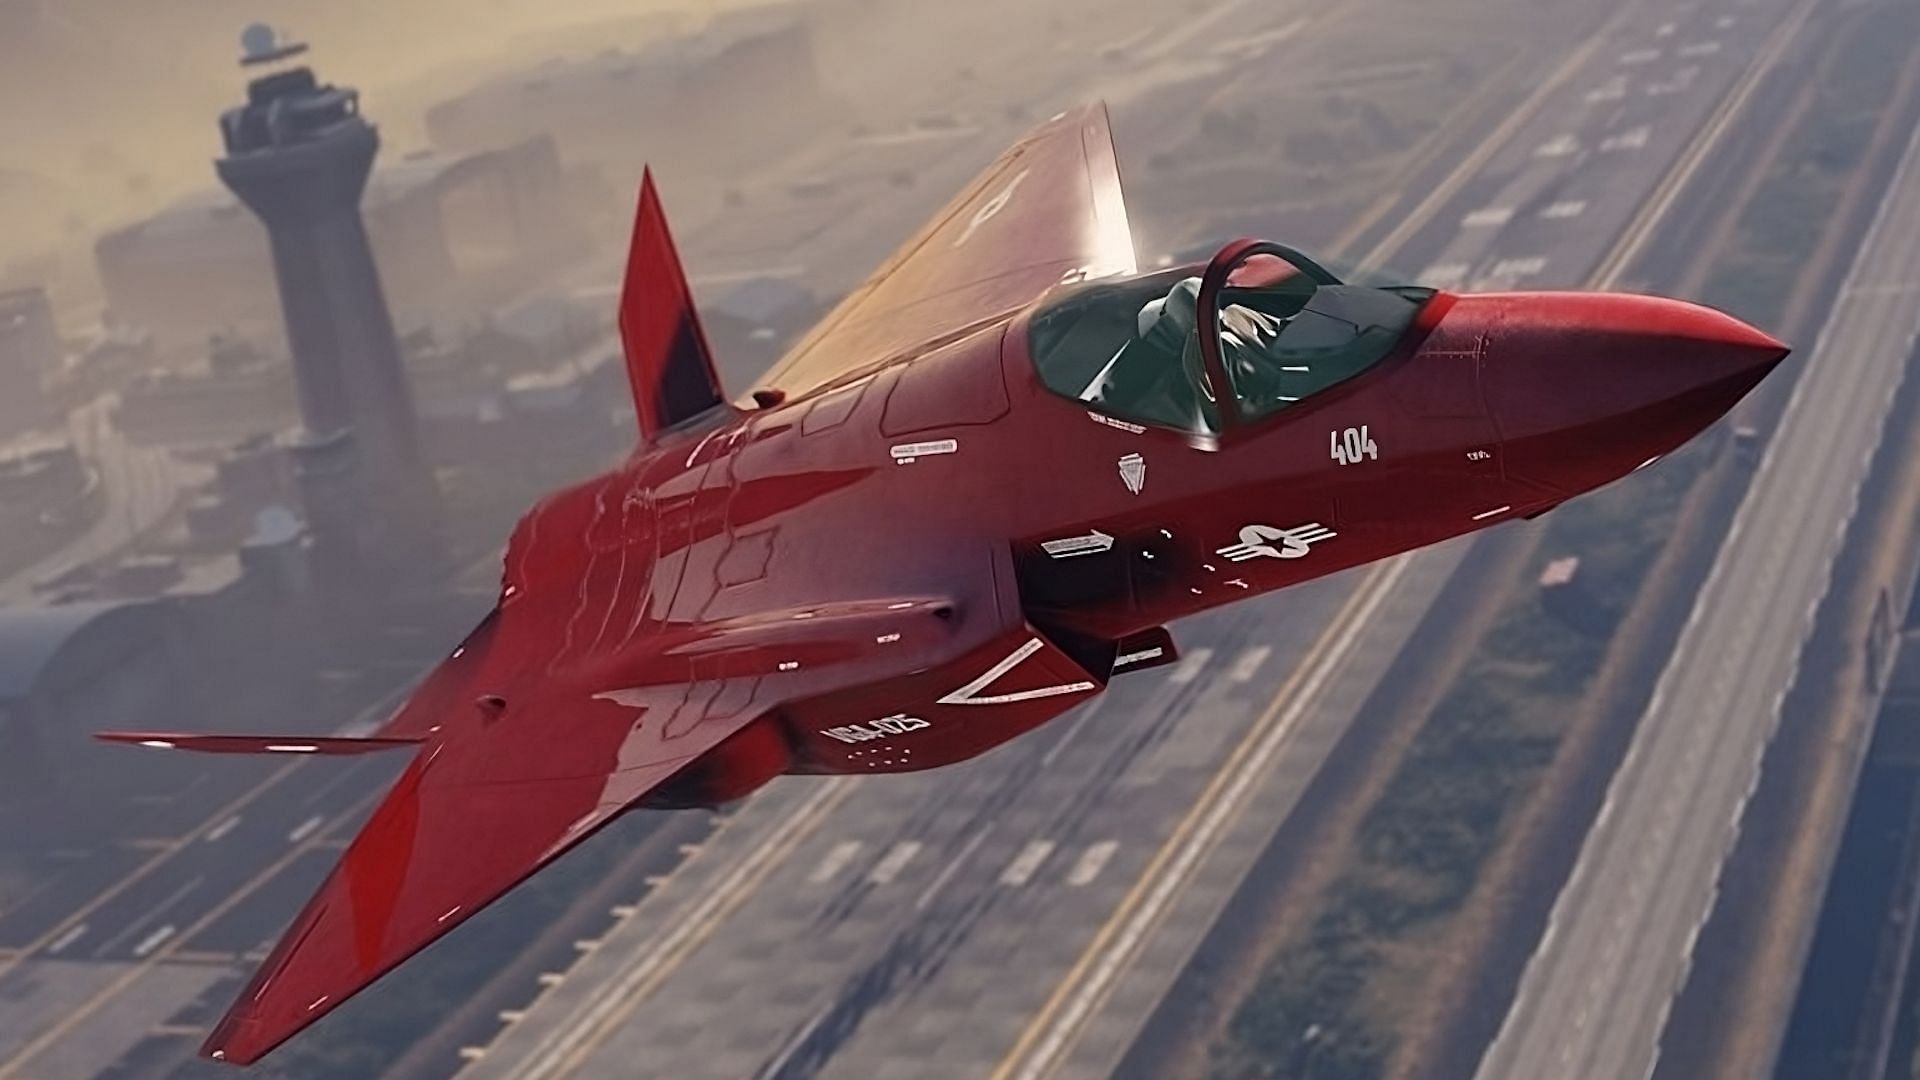 5 Reasons To Get The New Gta Online F 160 Raiju Jet After The Latest Update